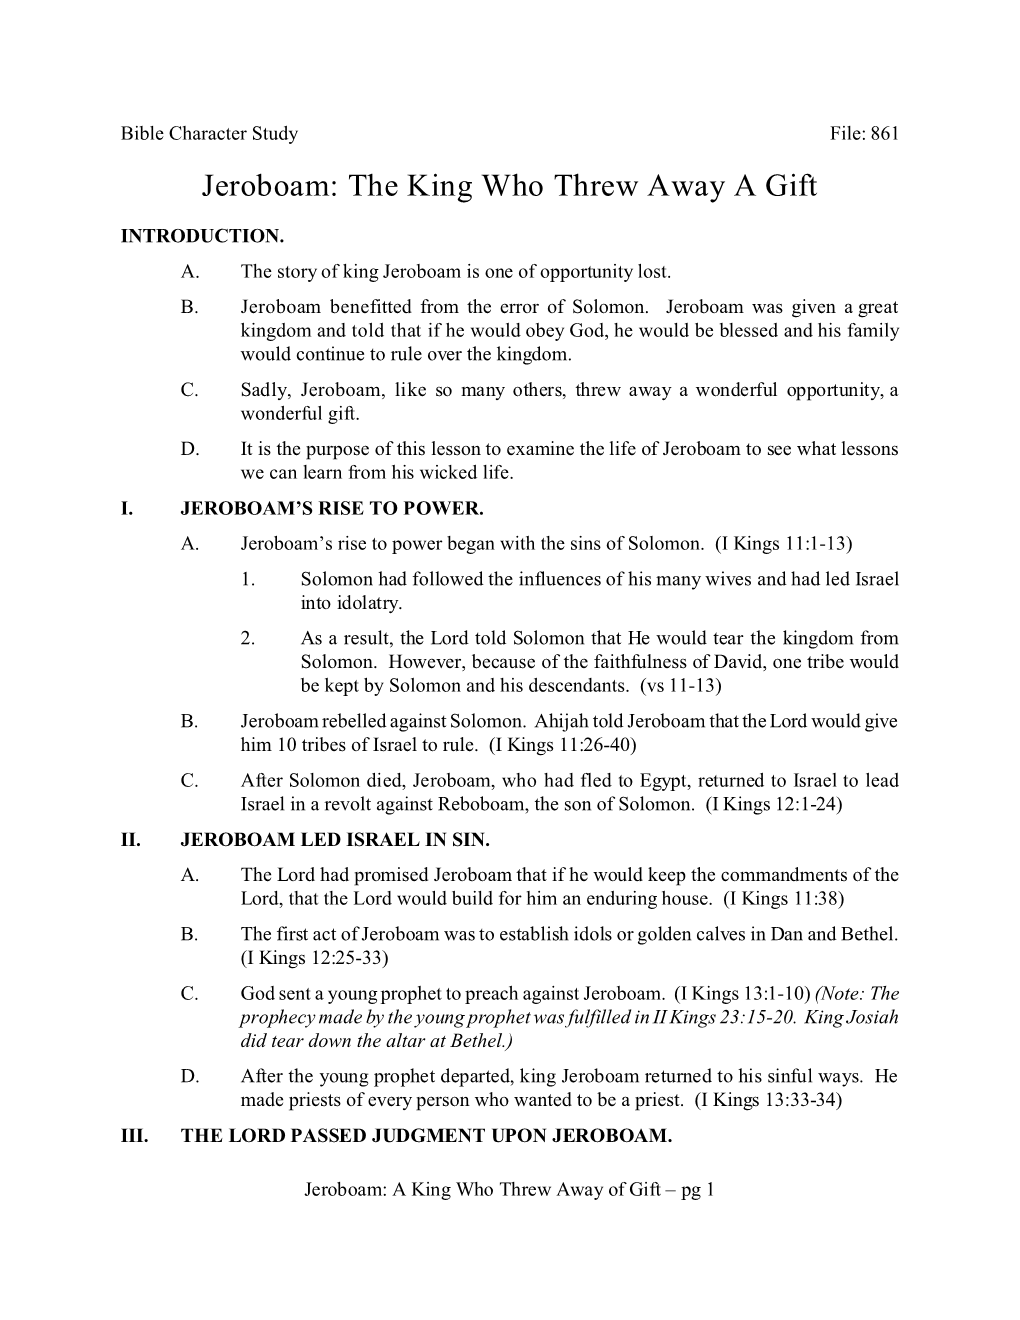 Jeroboam: the King Who Threw Away a Gift